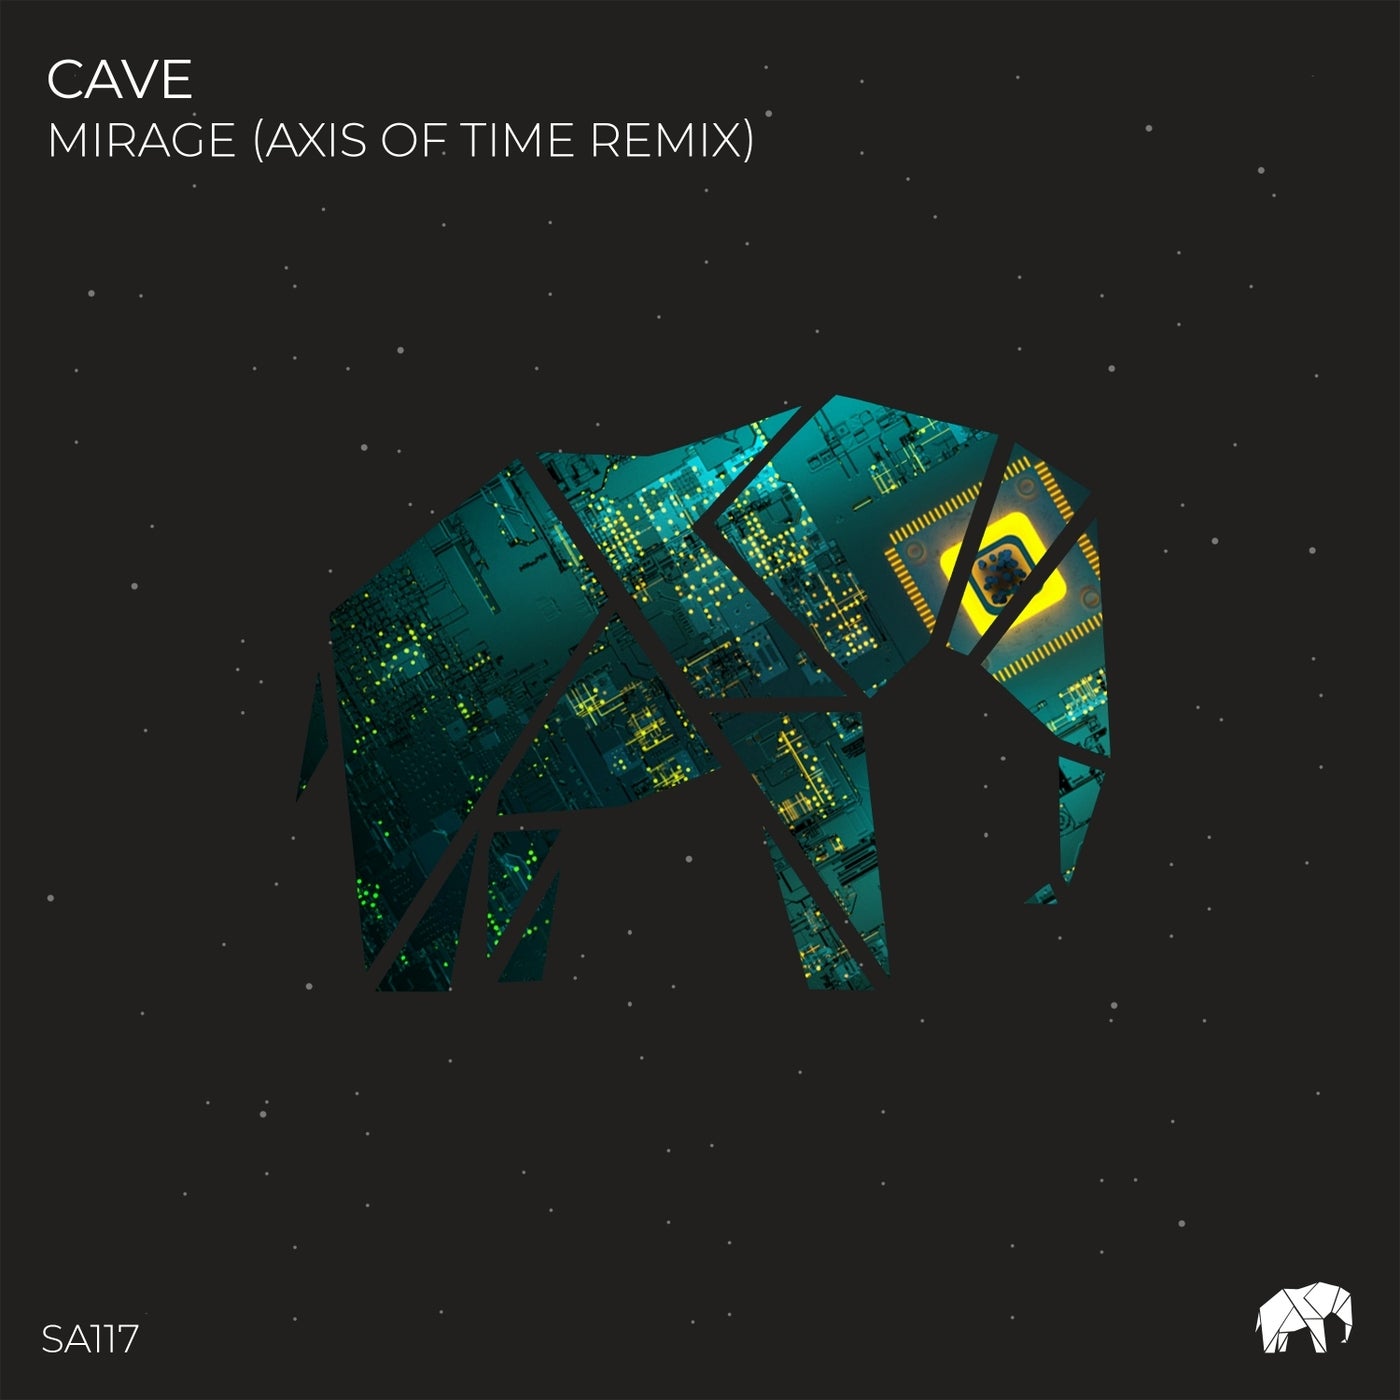 Cave – Mirage (Axis Of Time Remix) [SA117]